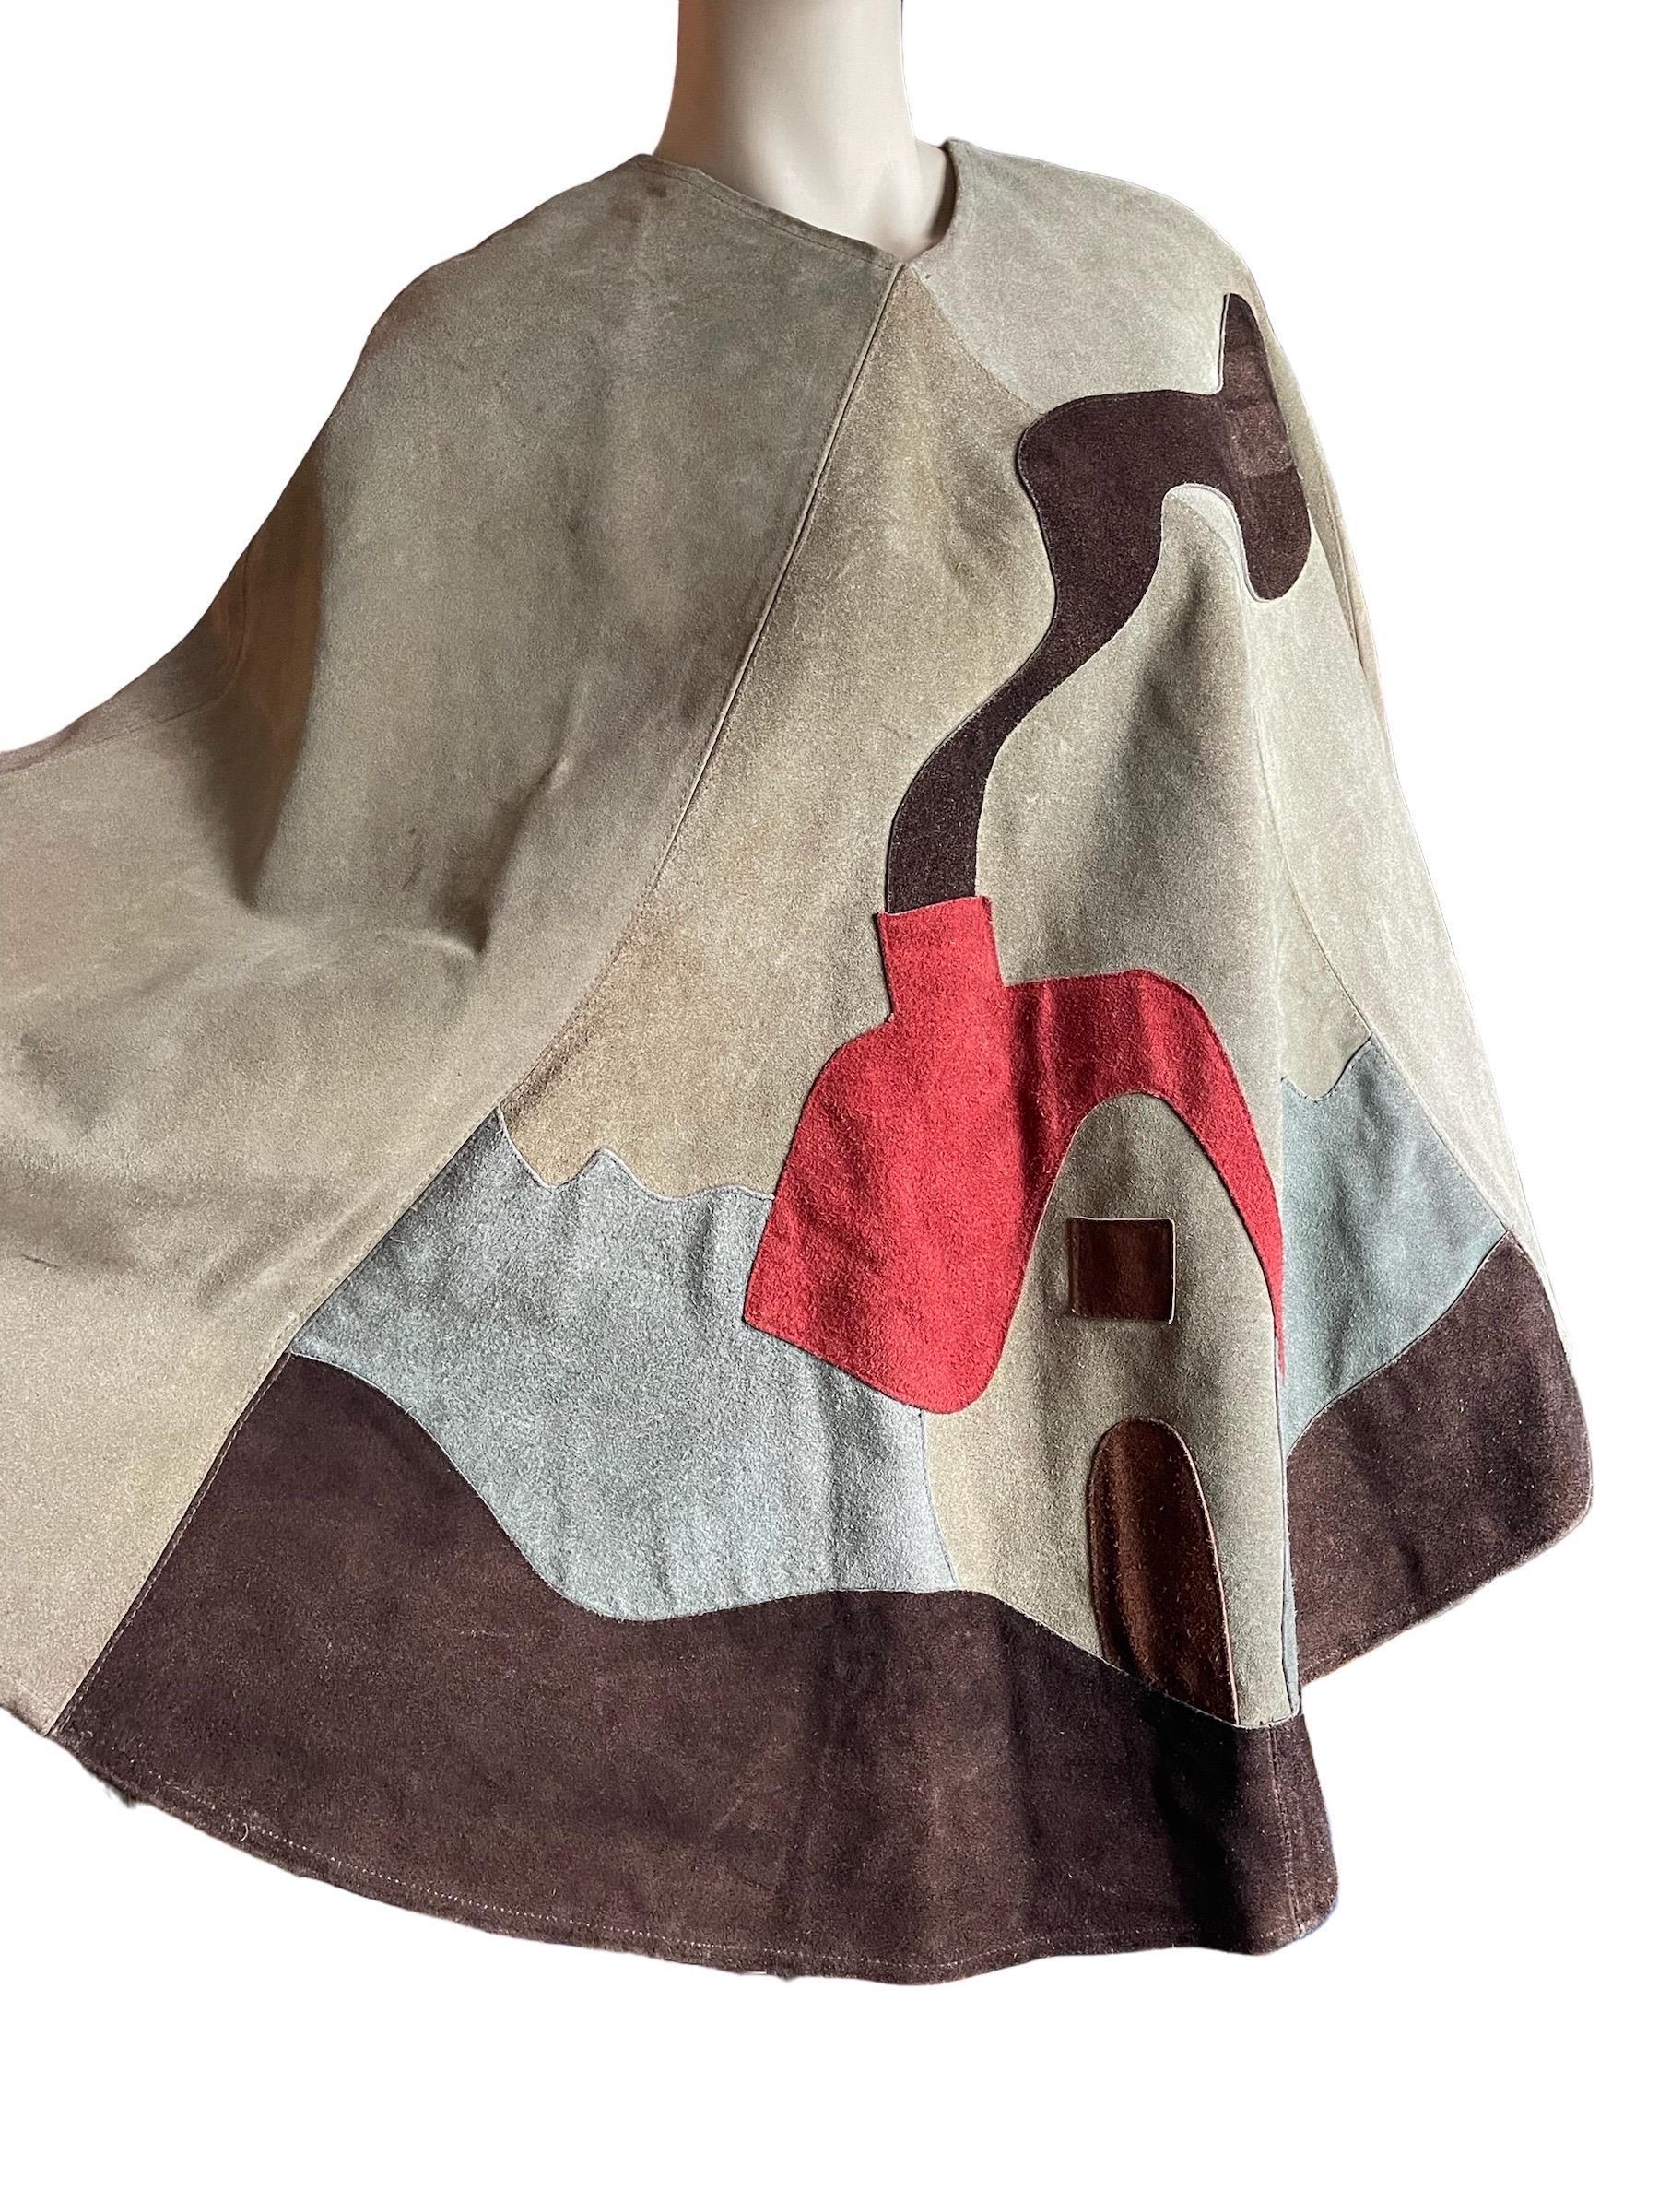 Women's or Men's 1970s Suede Patchwork Poncho 